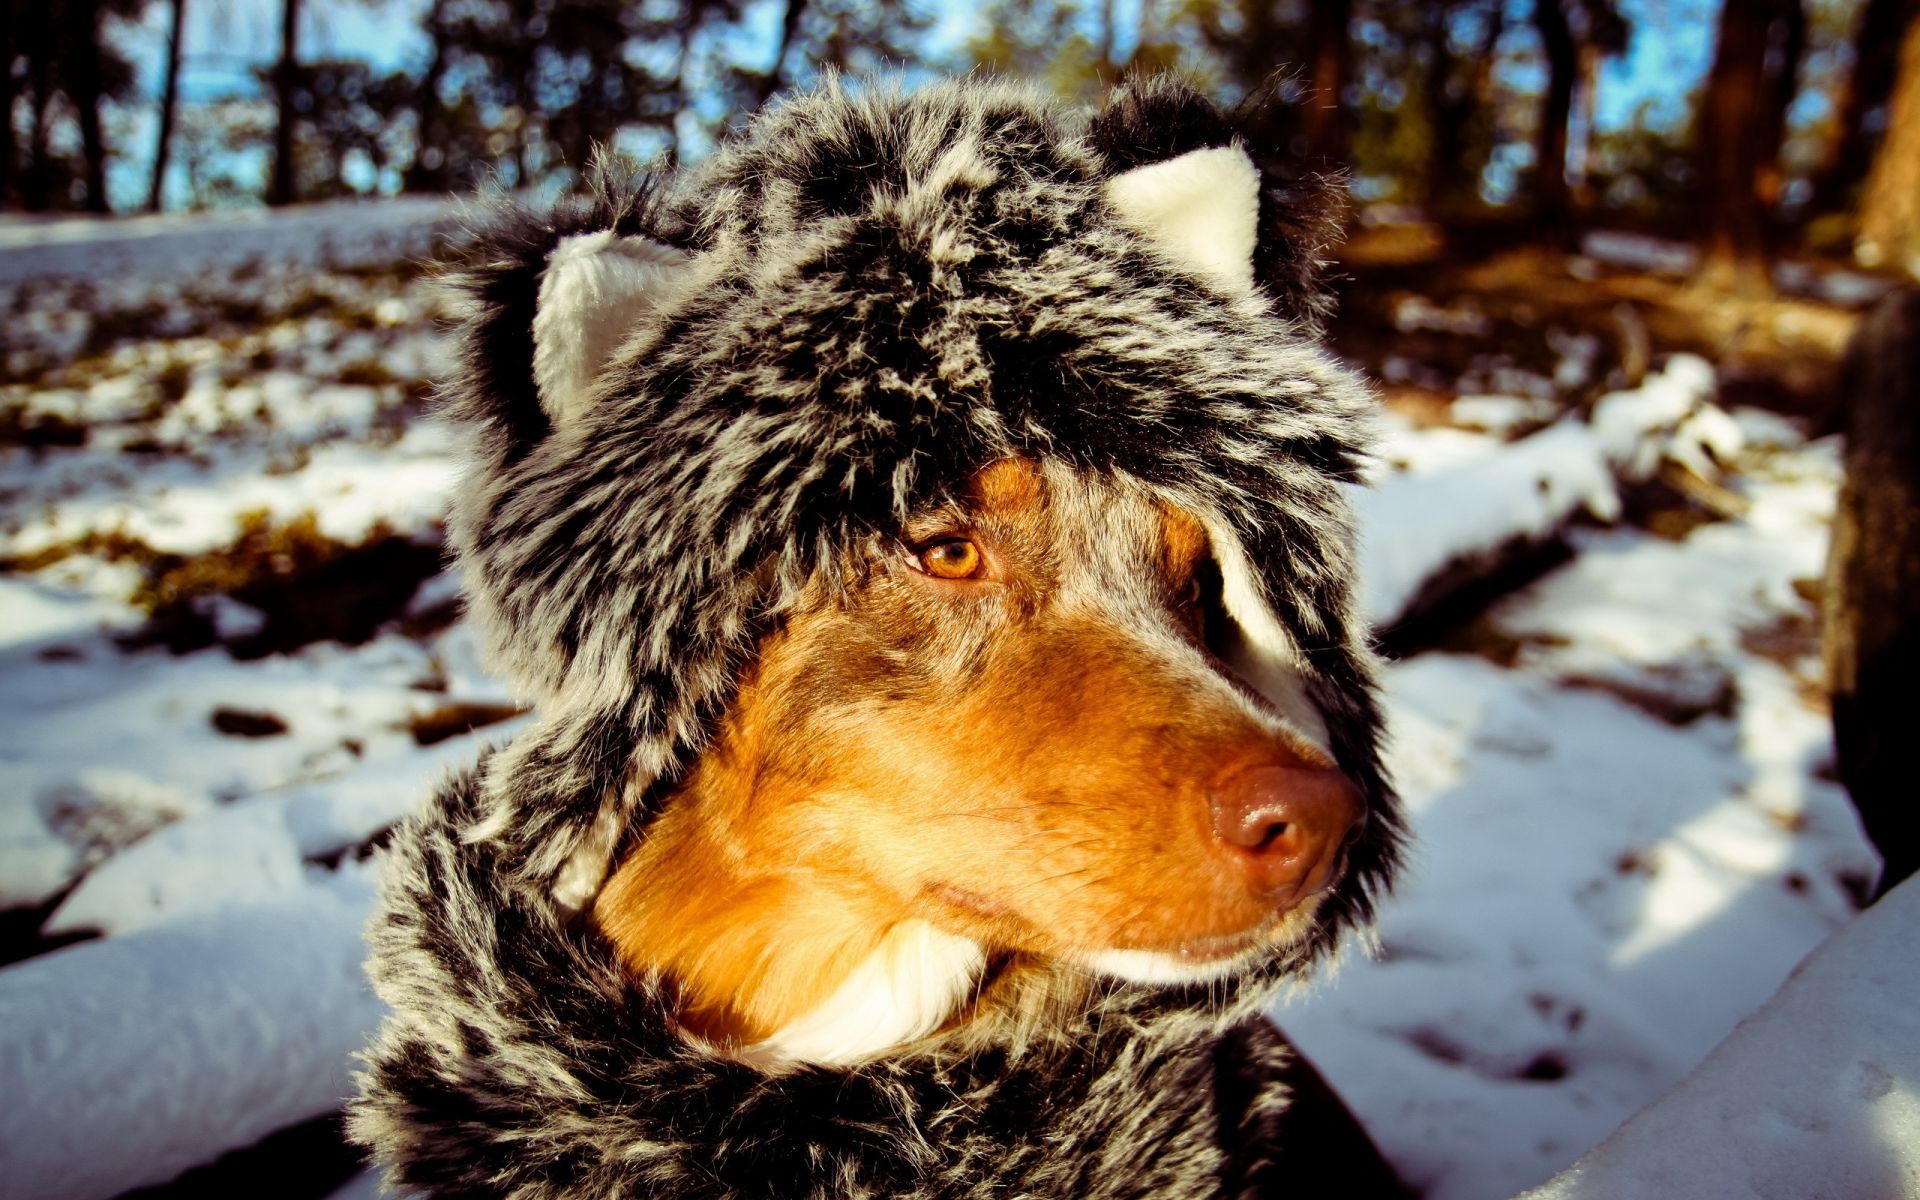 dogs mammal winter nature snow outdoors fur animal wildlife portrait cute canine dog cold